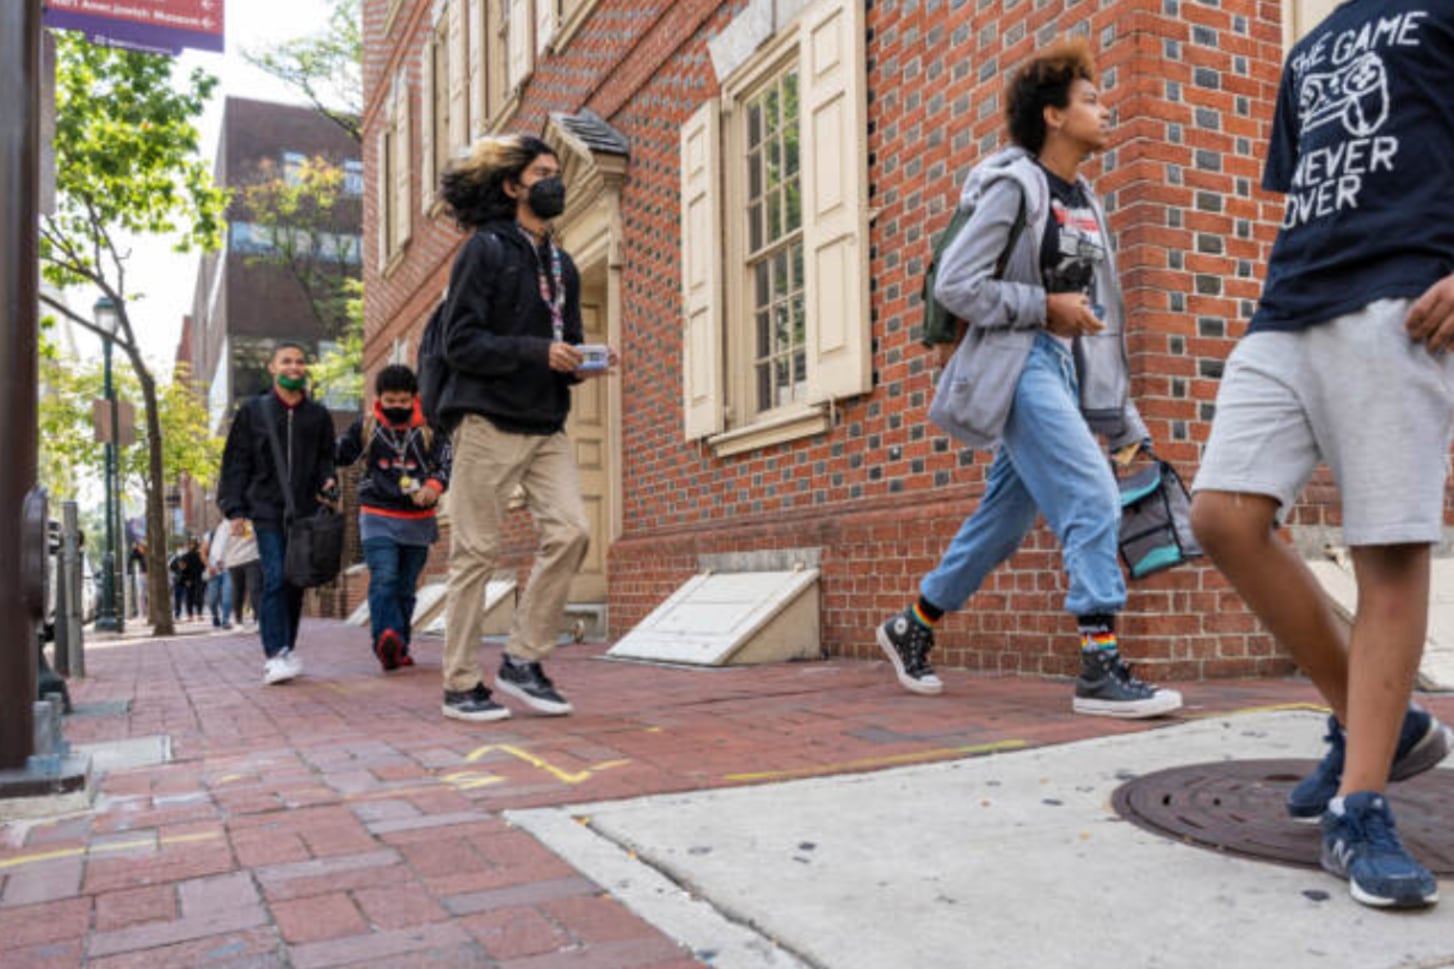 Students wearing backpacks walk in front of a brick building.